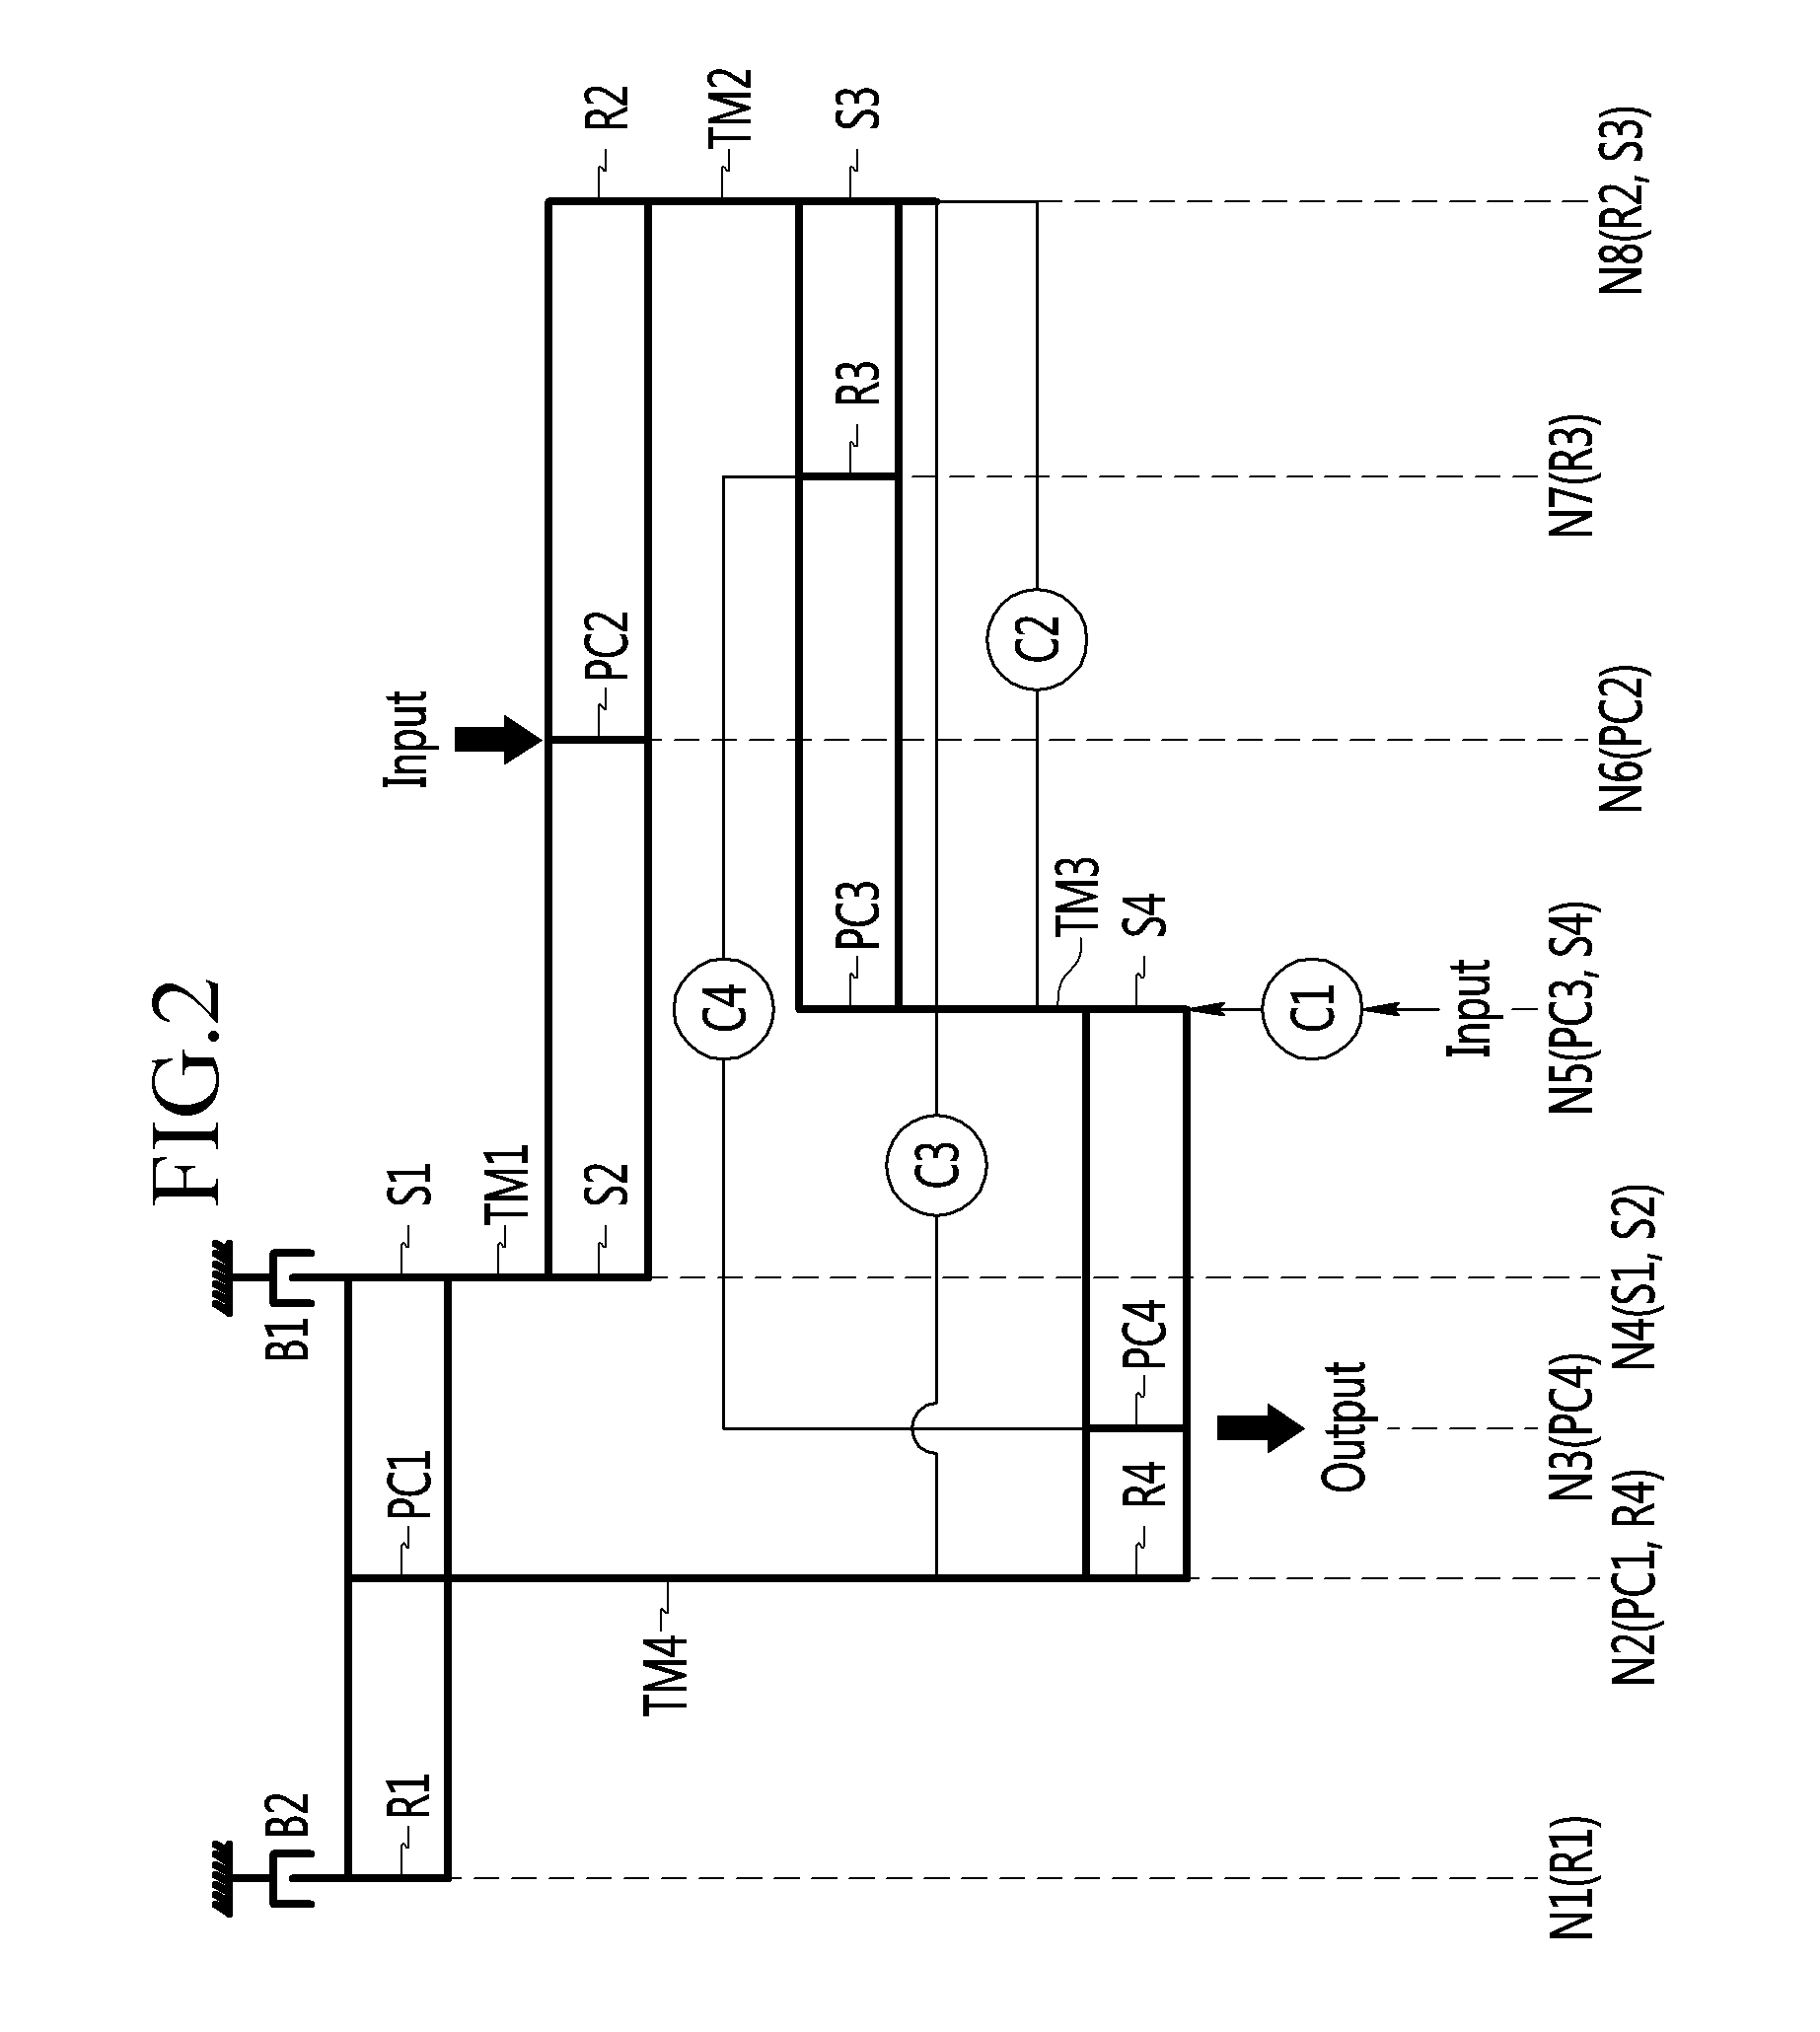 Gear train of automatic transmission for vehicles